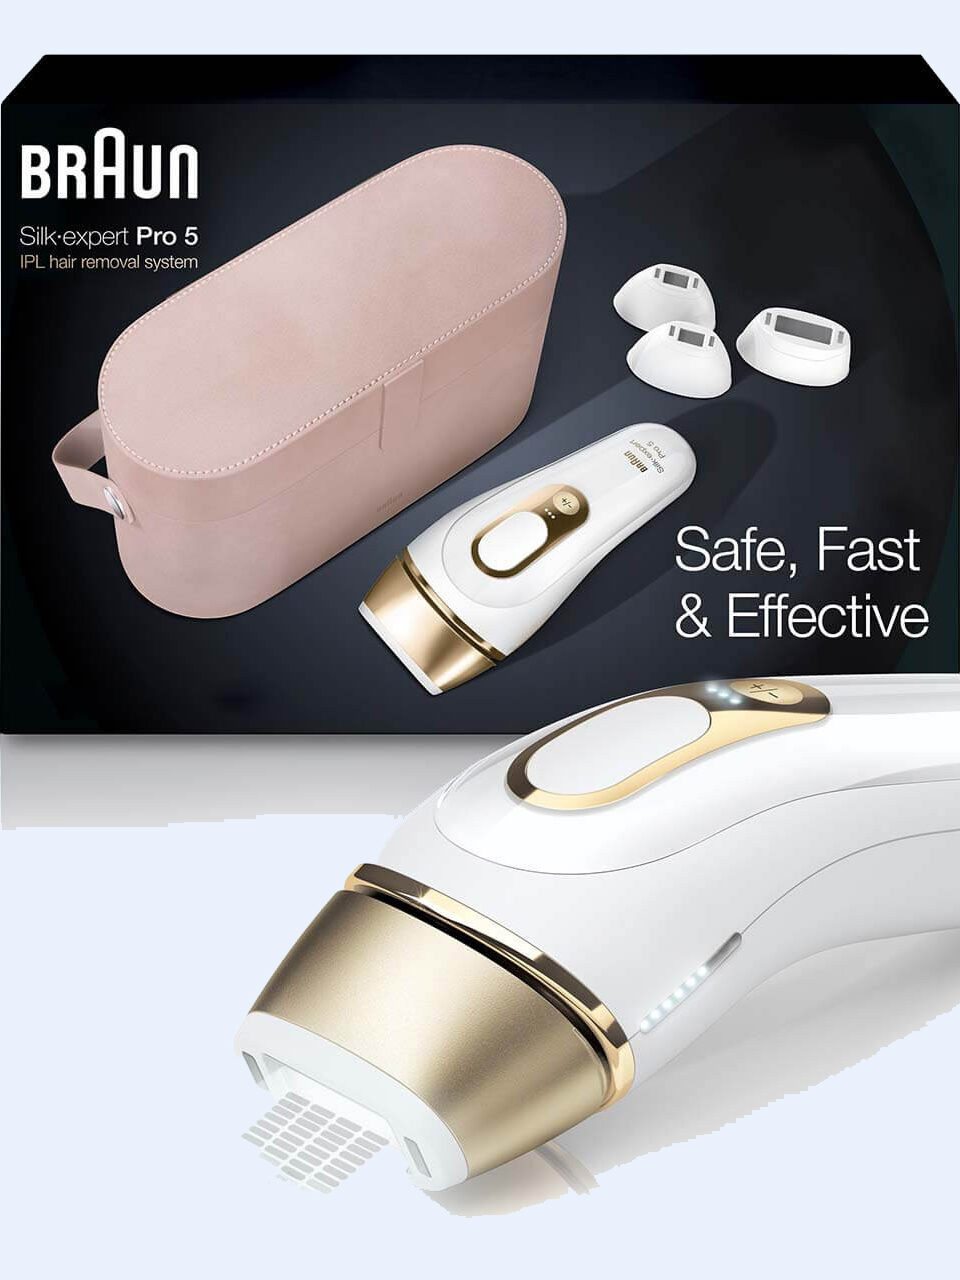 Braun's safe, fast, and effective hair removal device.